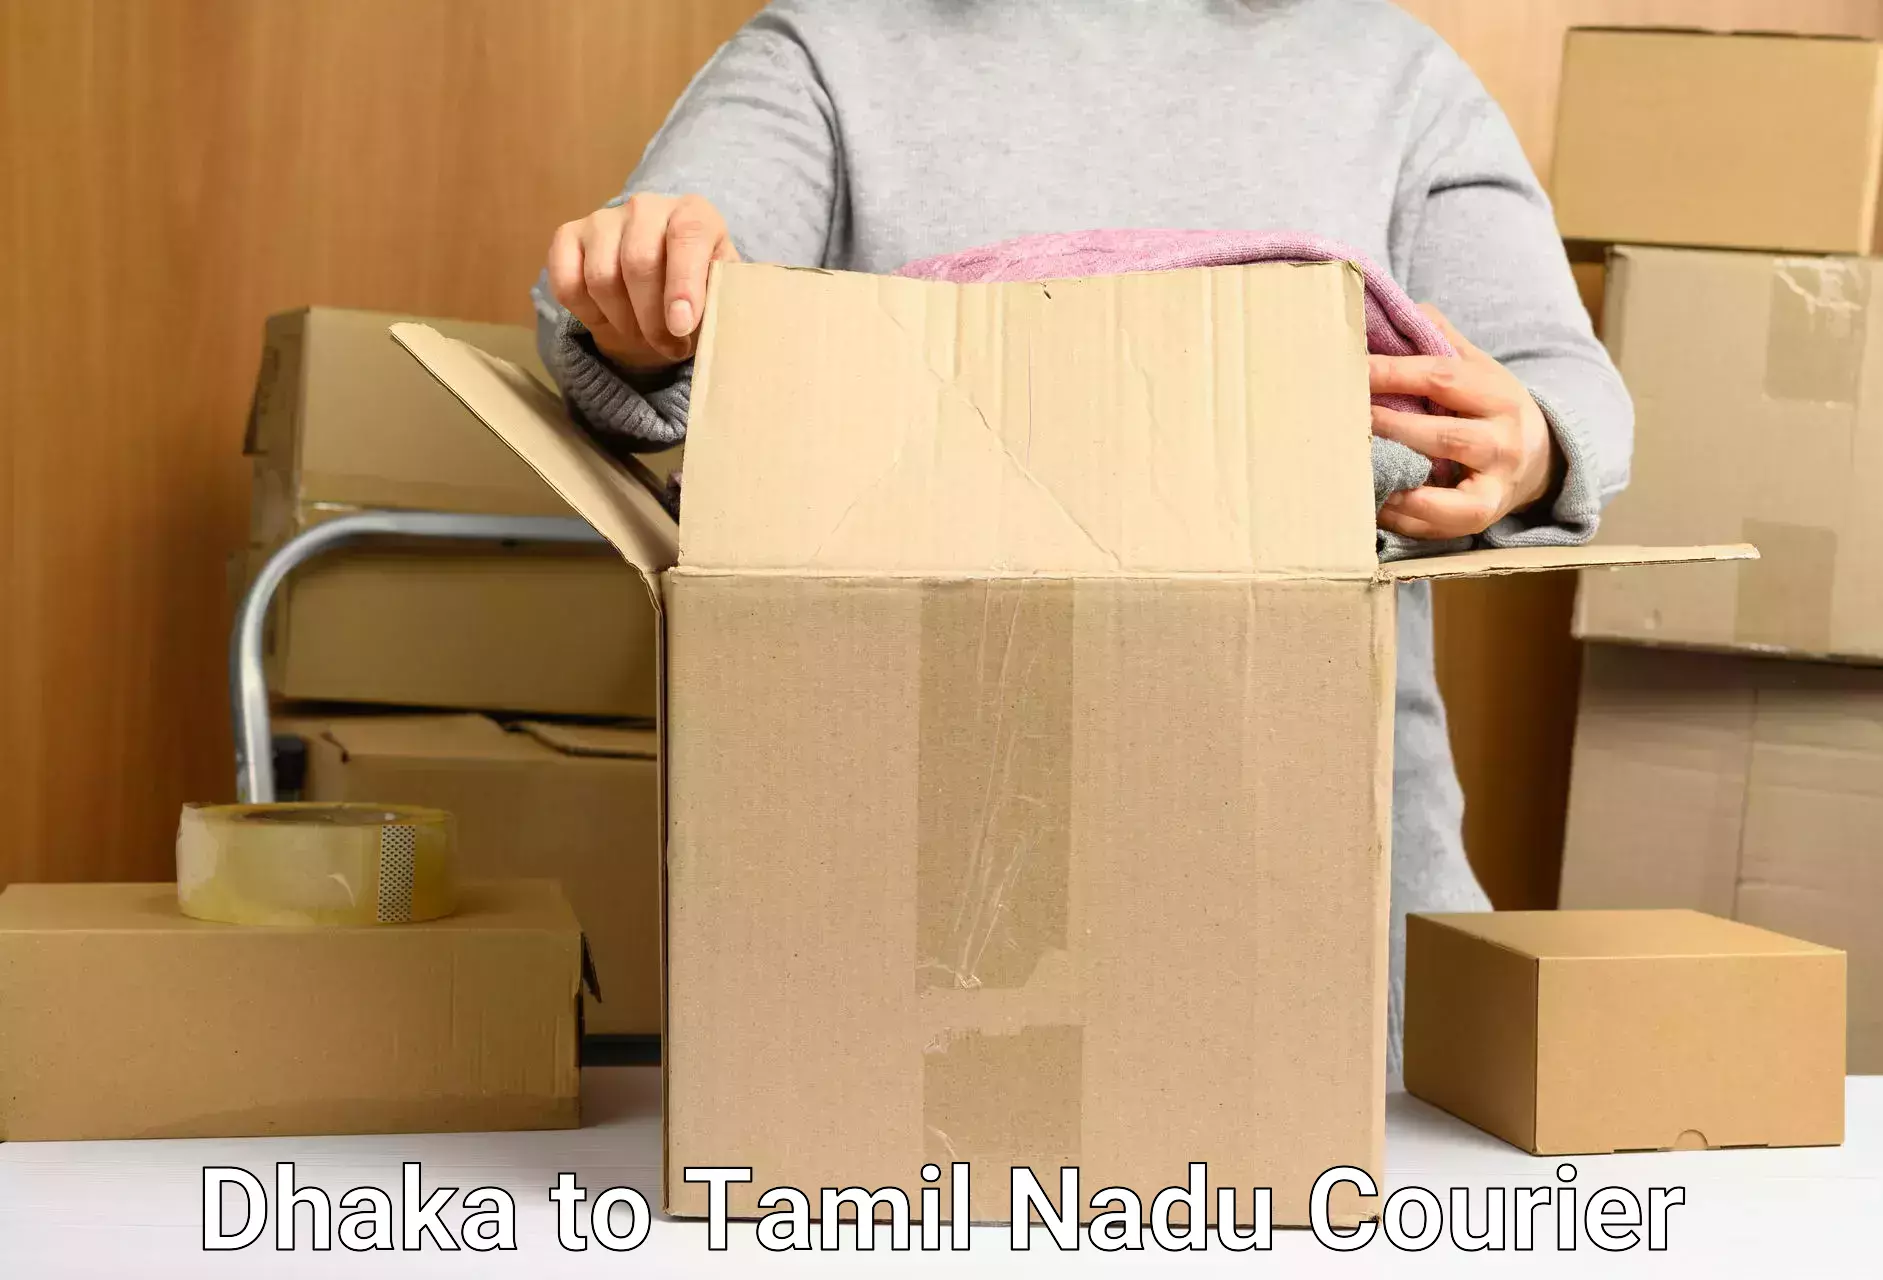 Efficient package consolidation Dhaka to Tamil Nadu